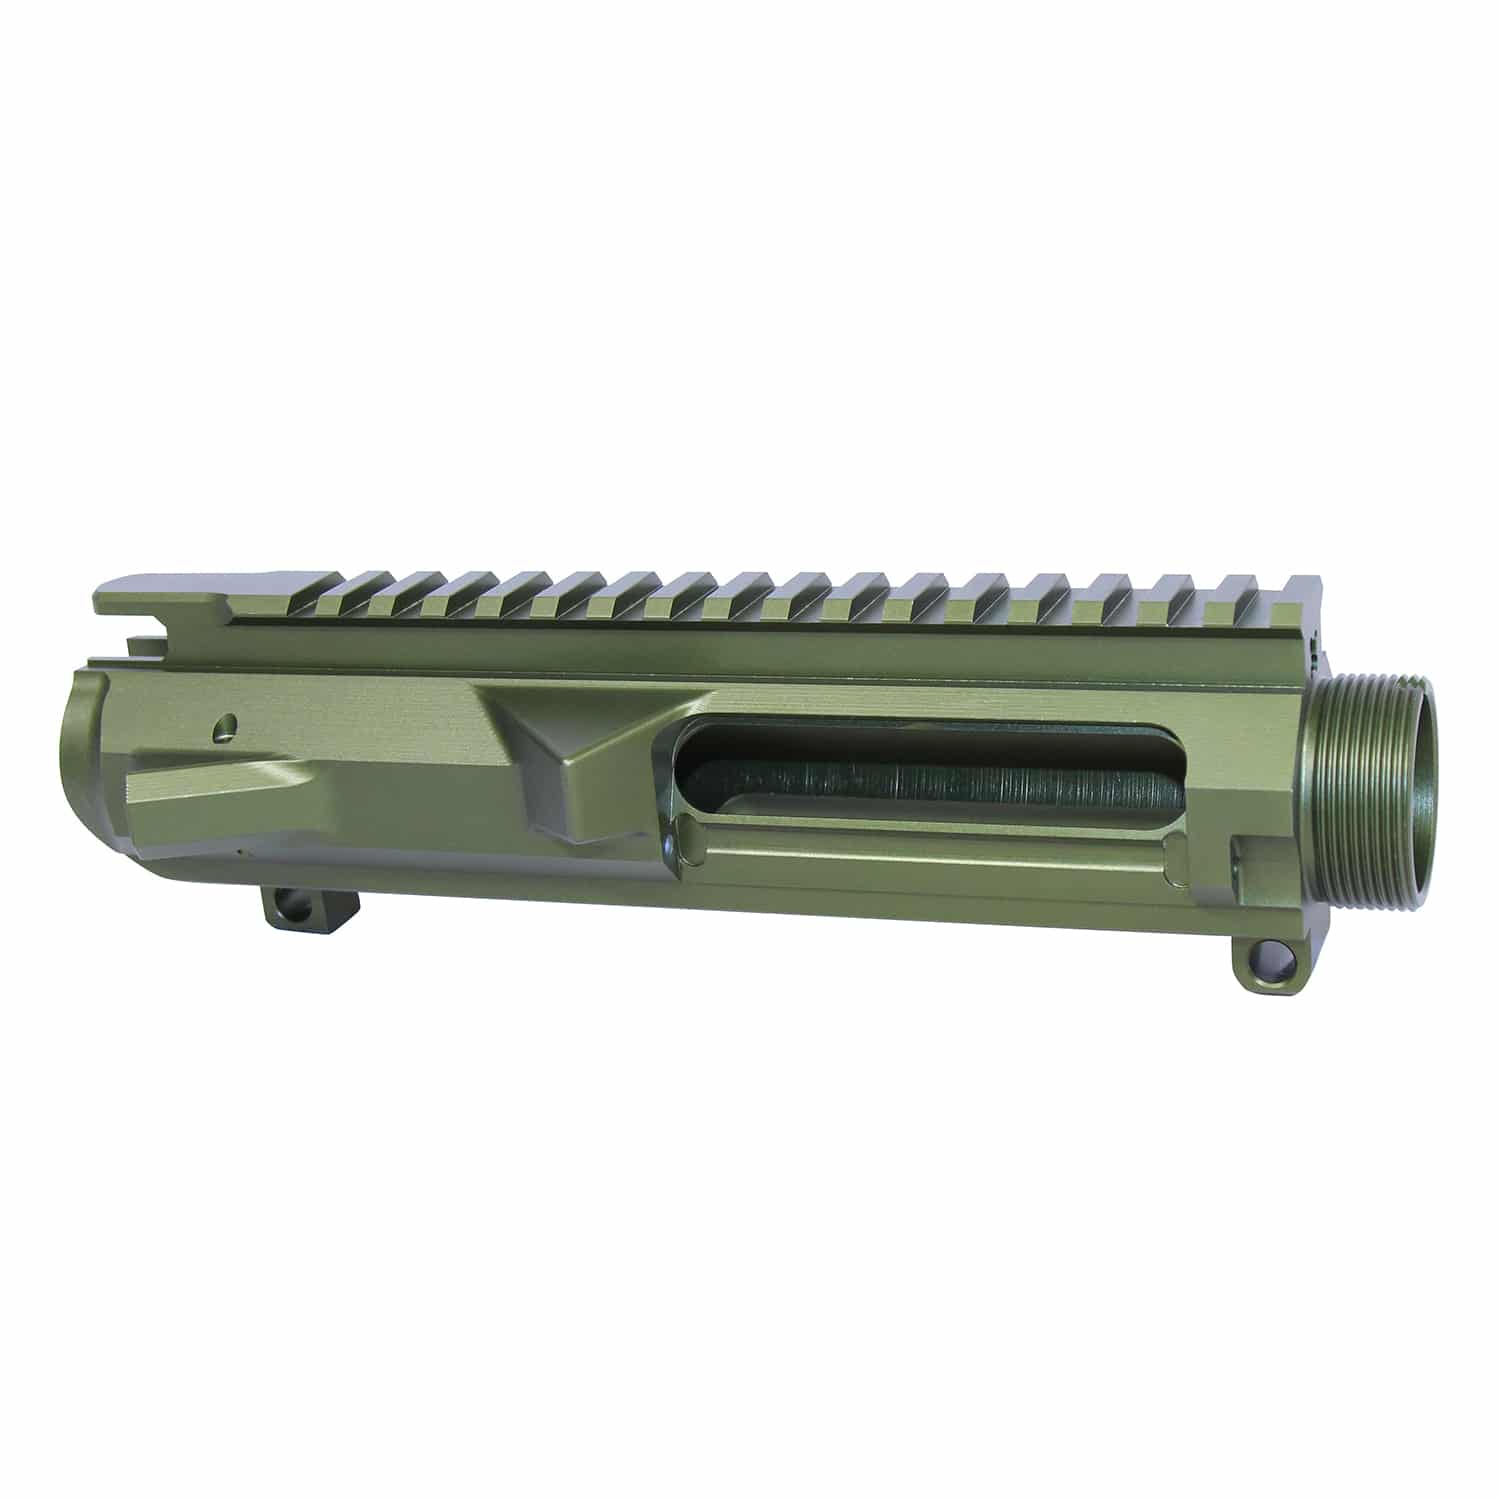 Stripped .308 caliber billet upper receiver Gen 2 in a military green anodized finish.